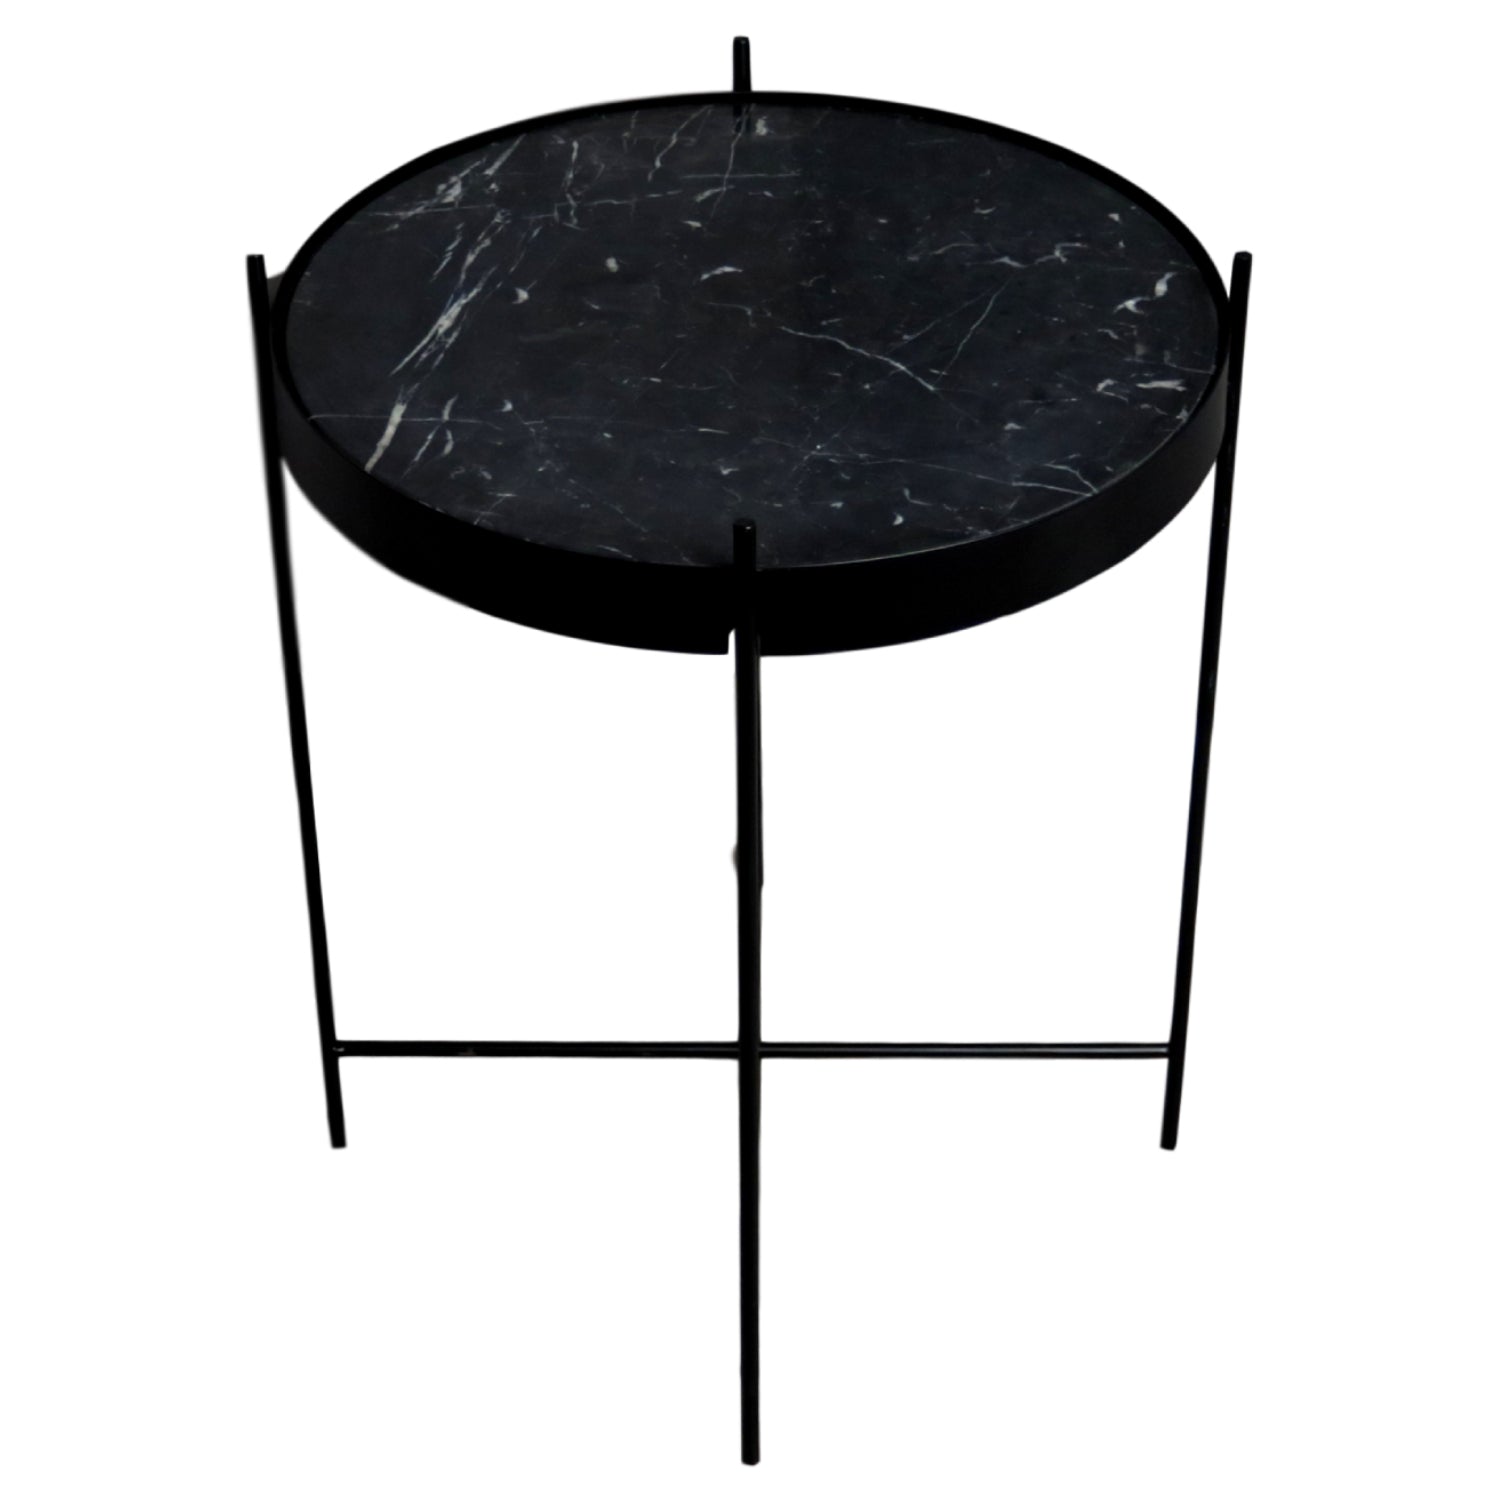 Black marble side table by Native